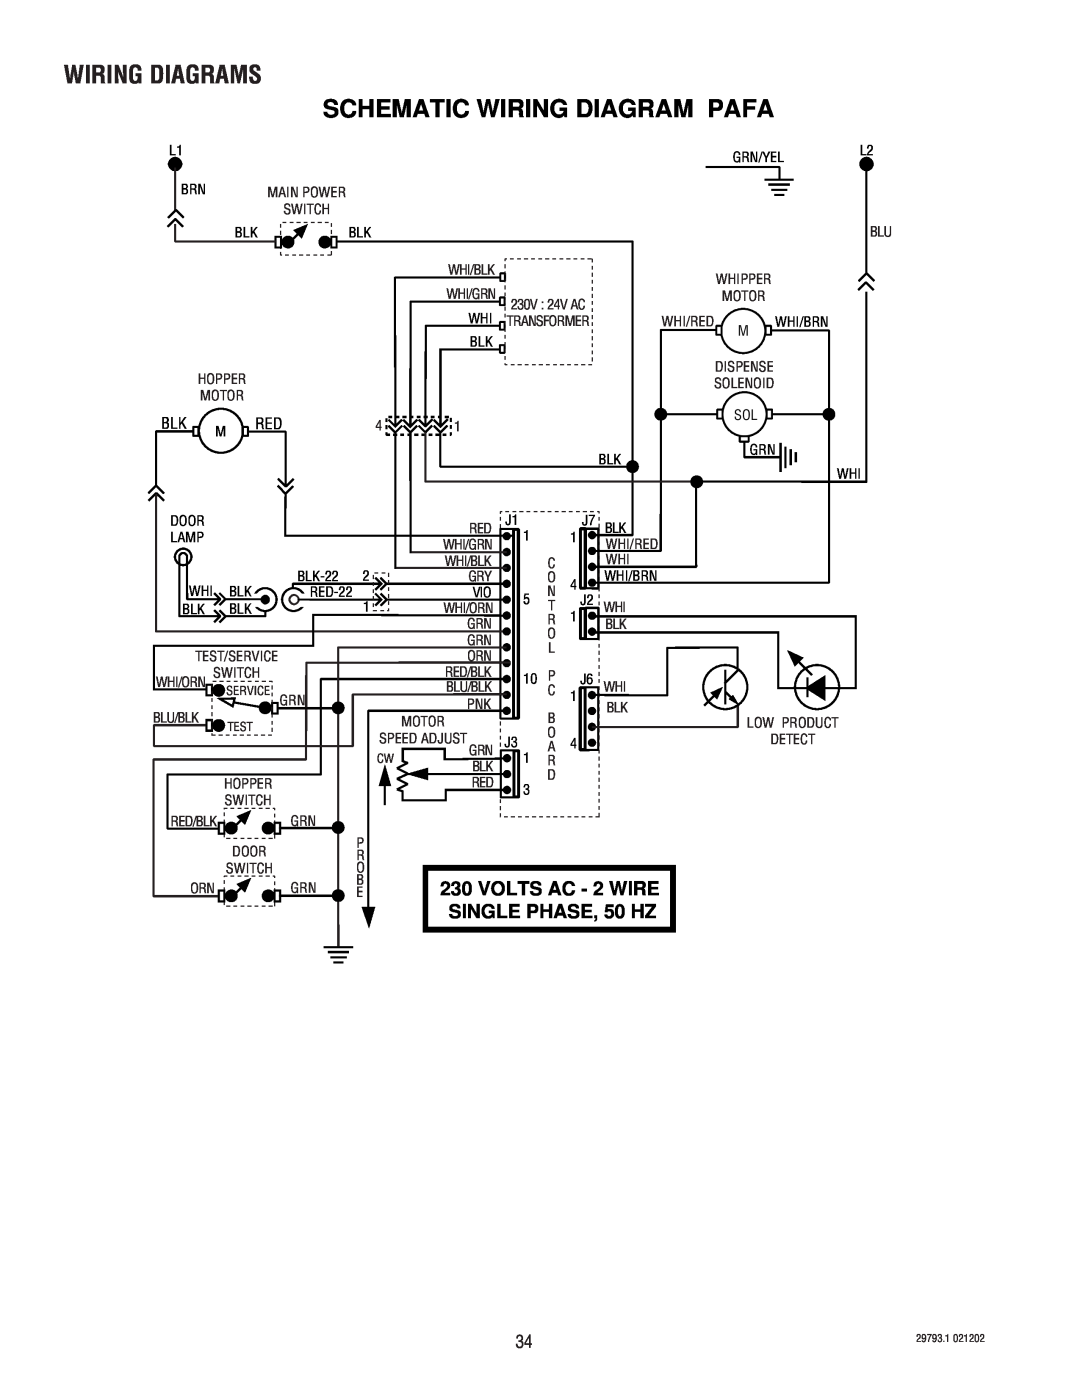 Bunn dispenser service manual Schematic Wiring Diagram Pafa, Wiring Diagrams, VOLTS AC - 2 WIRE, SINGLE PHASE, 50 HZ 